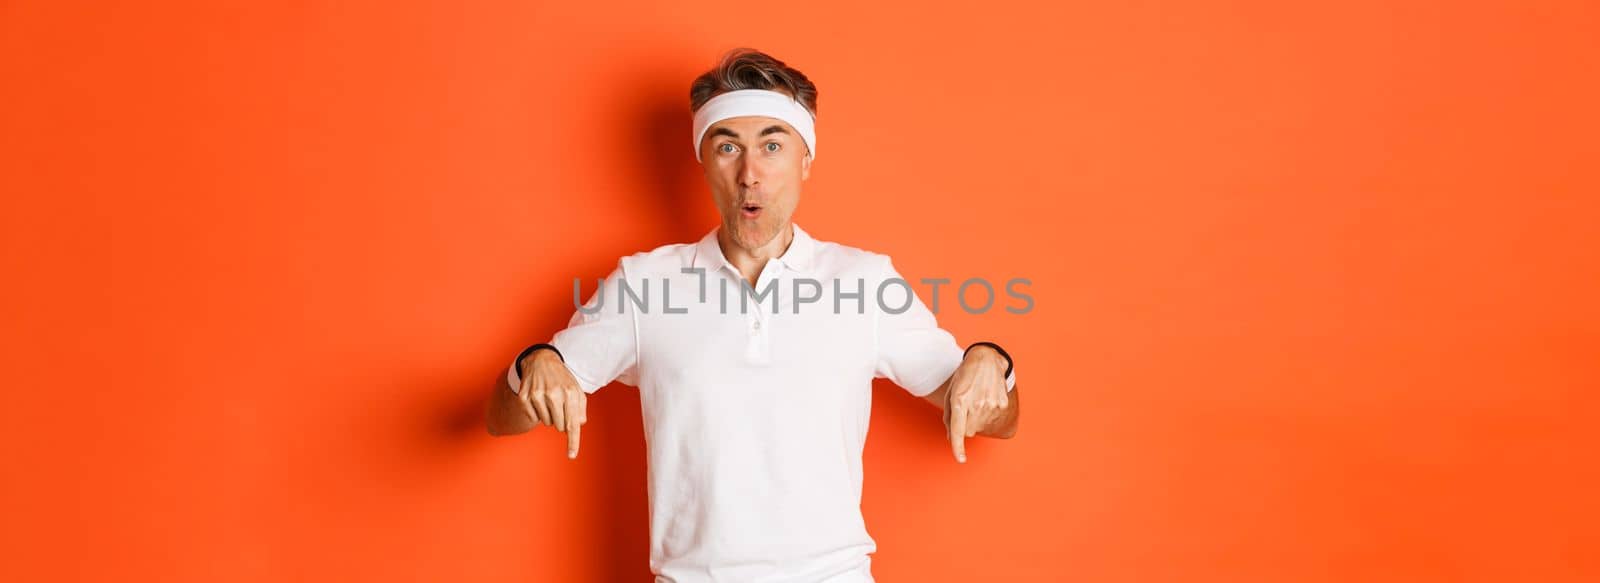 Concept of workout, sports and lifestyle. Portrait of surprised middle-aged male athlete, wearing clothes for gym, pointing fingers down and looking amazed, standing over orange background.